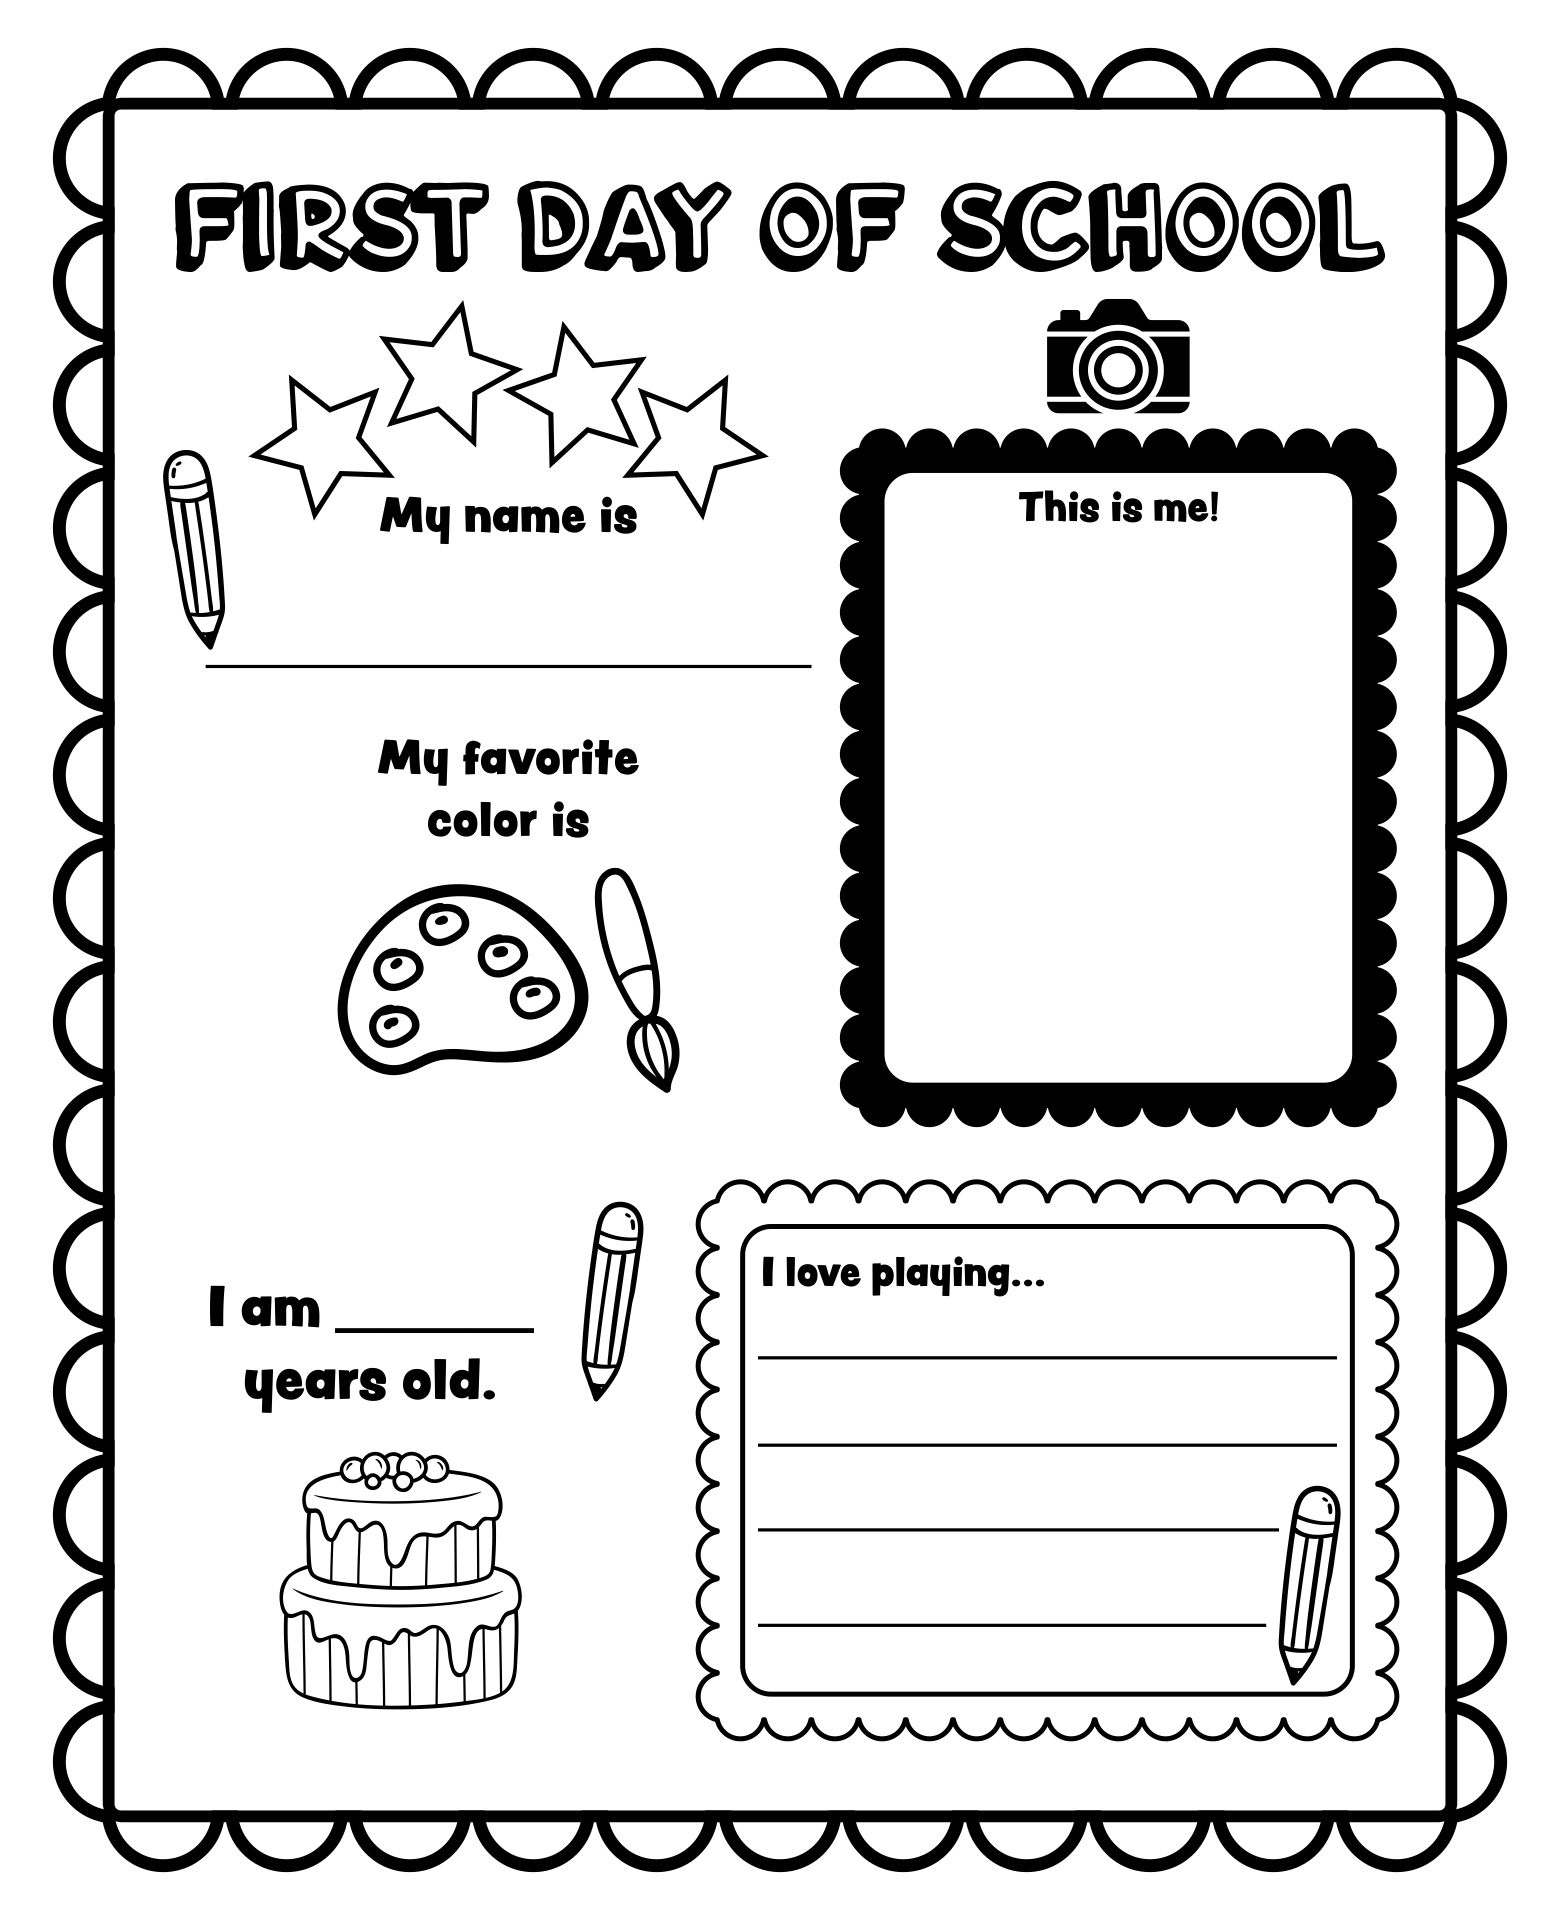 First Day at School Worksheet